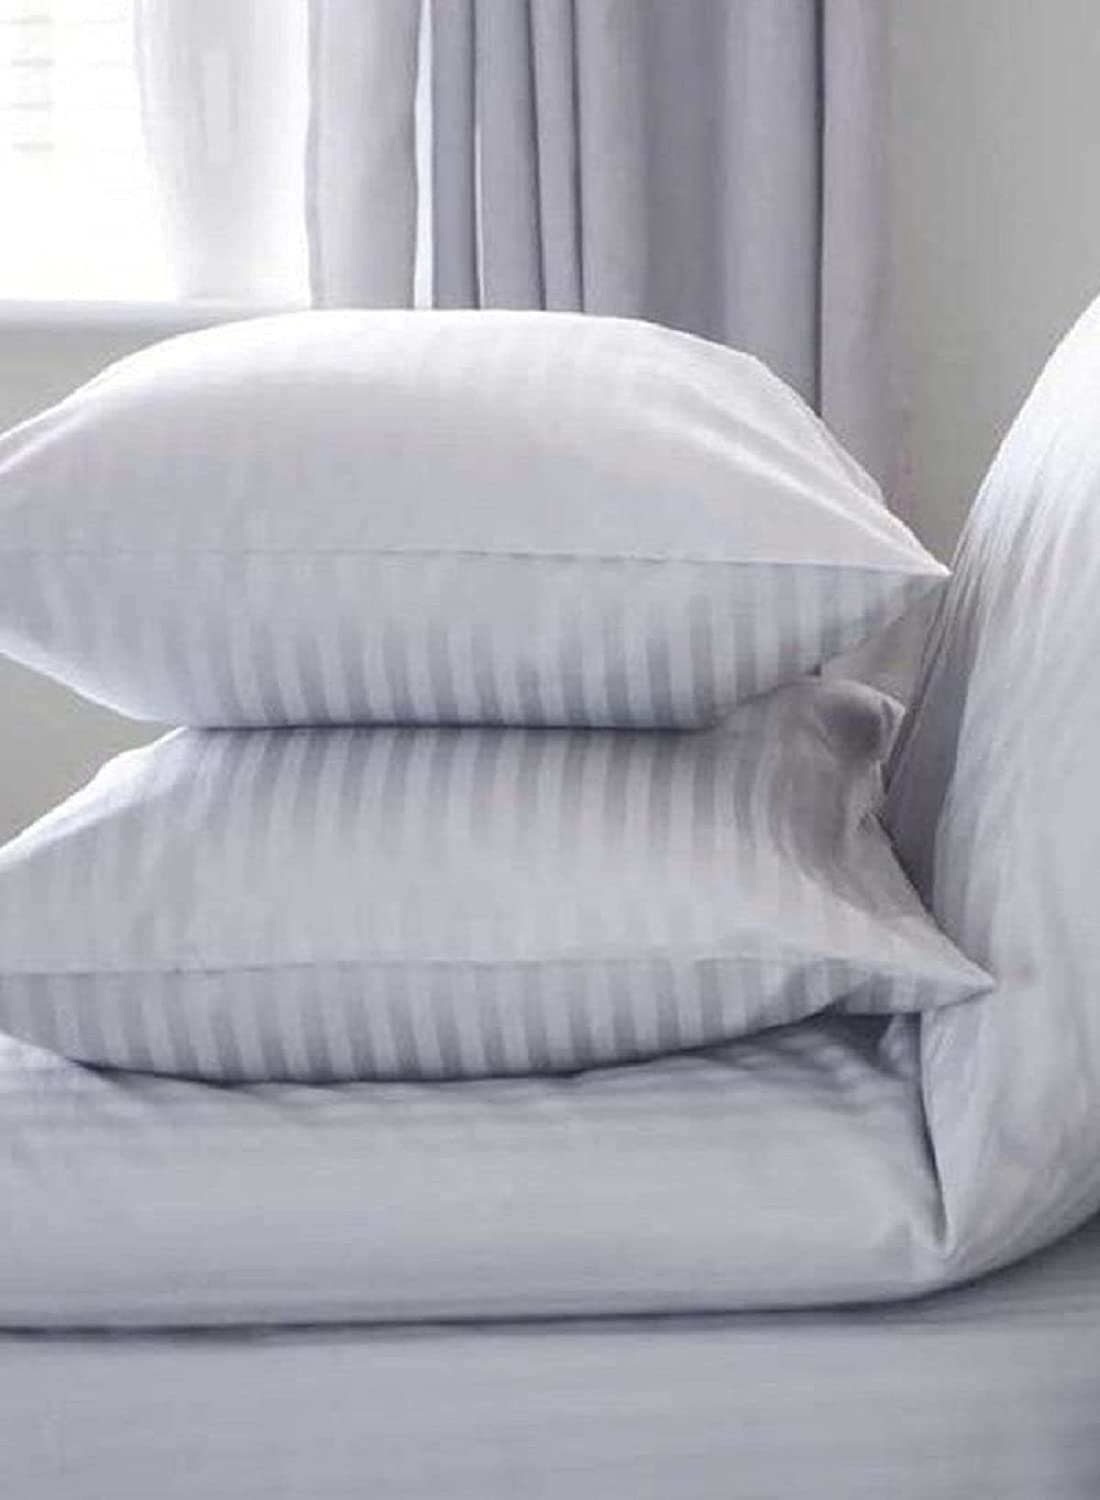 Pillow for Bed, Soft Pillows for Sleeping, White, Set/Pack of 4 Pillows - JDX STORE